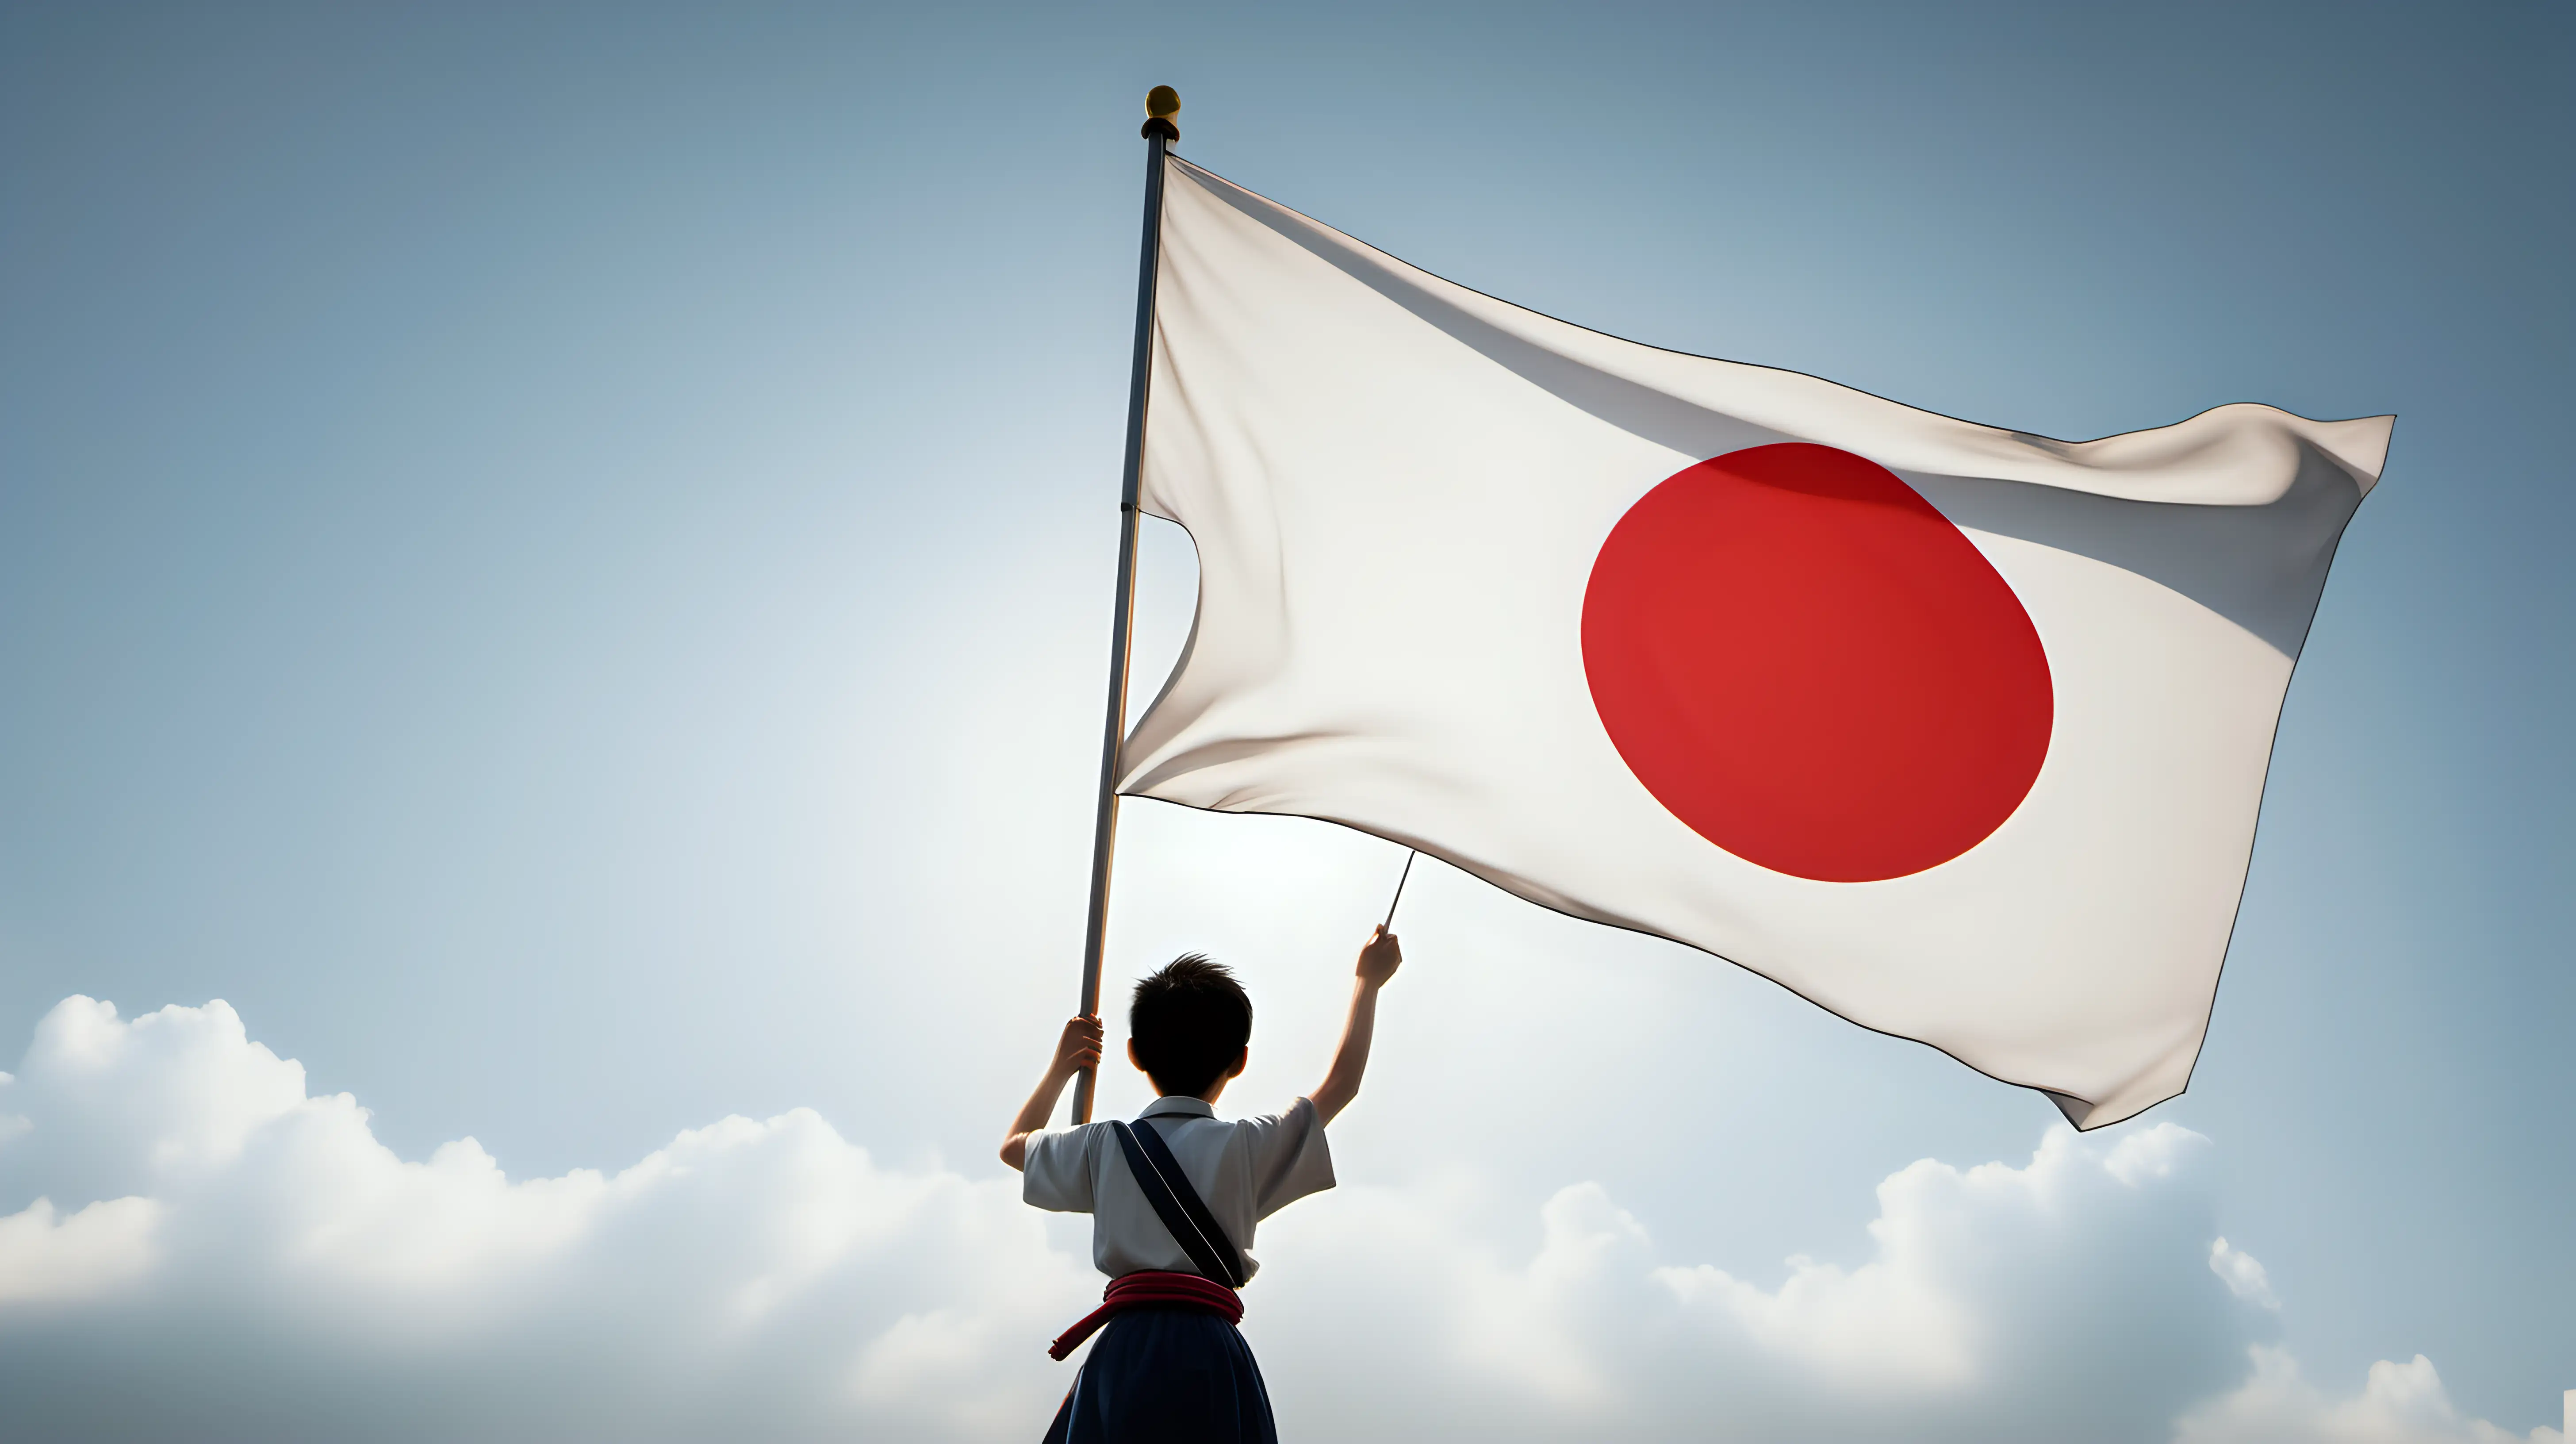 Create a dynamic visual of someone raising the Japanese flag with enthusiasm, embodying the spirit of patriotism and love for their homeland.